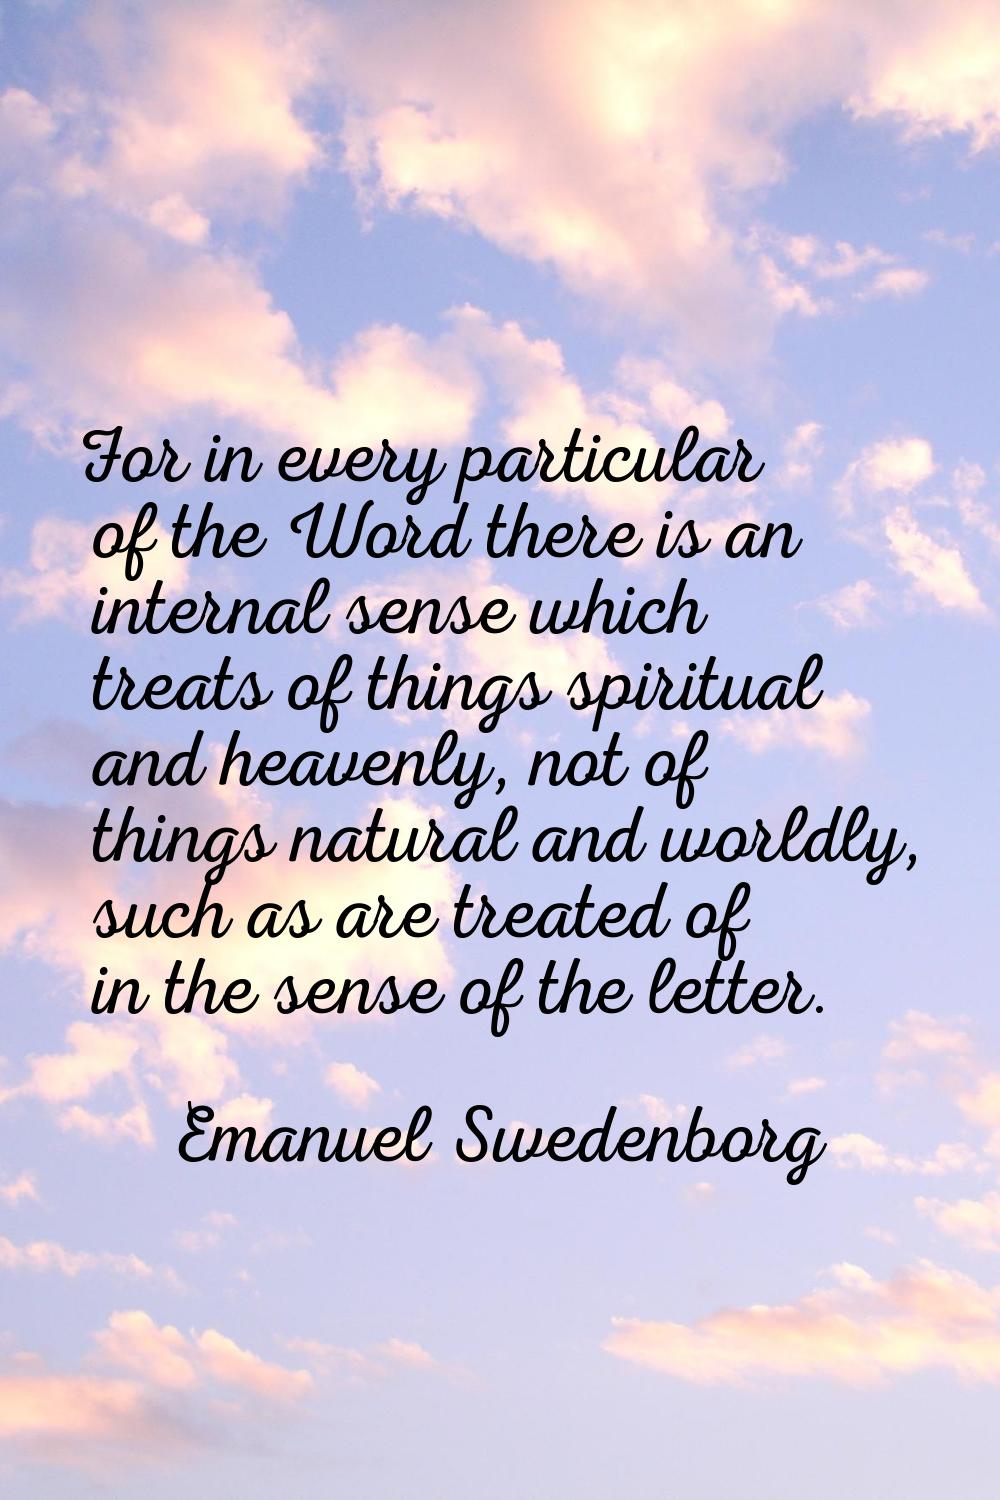 For in every particular of the Word there is an internal sense which treats of things spiritual and